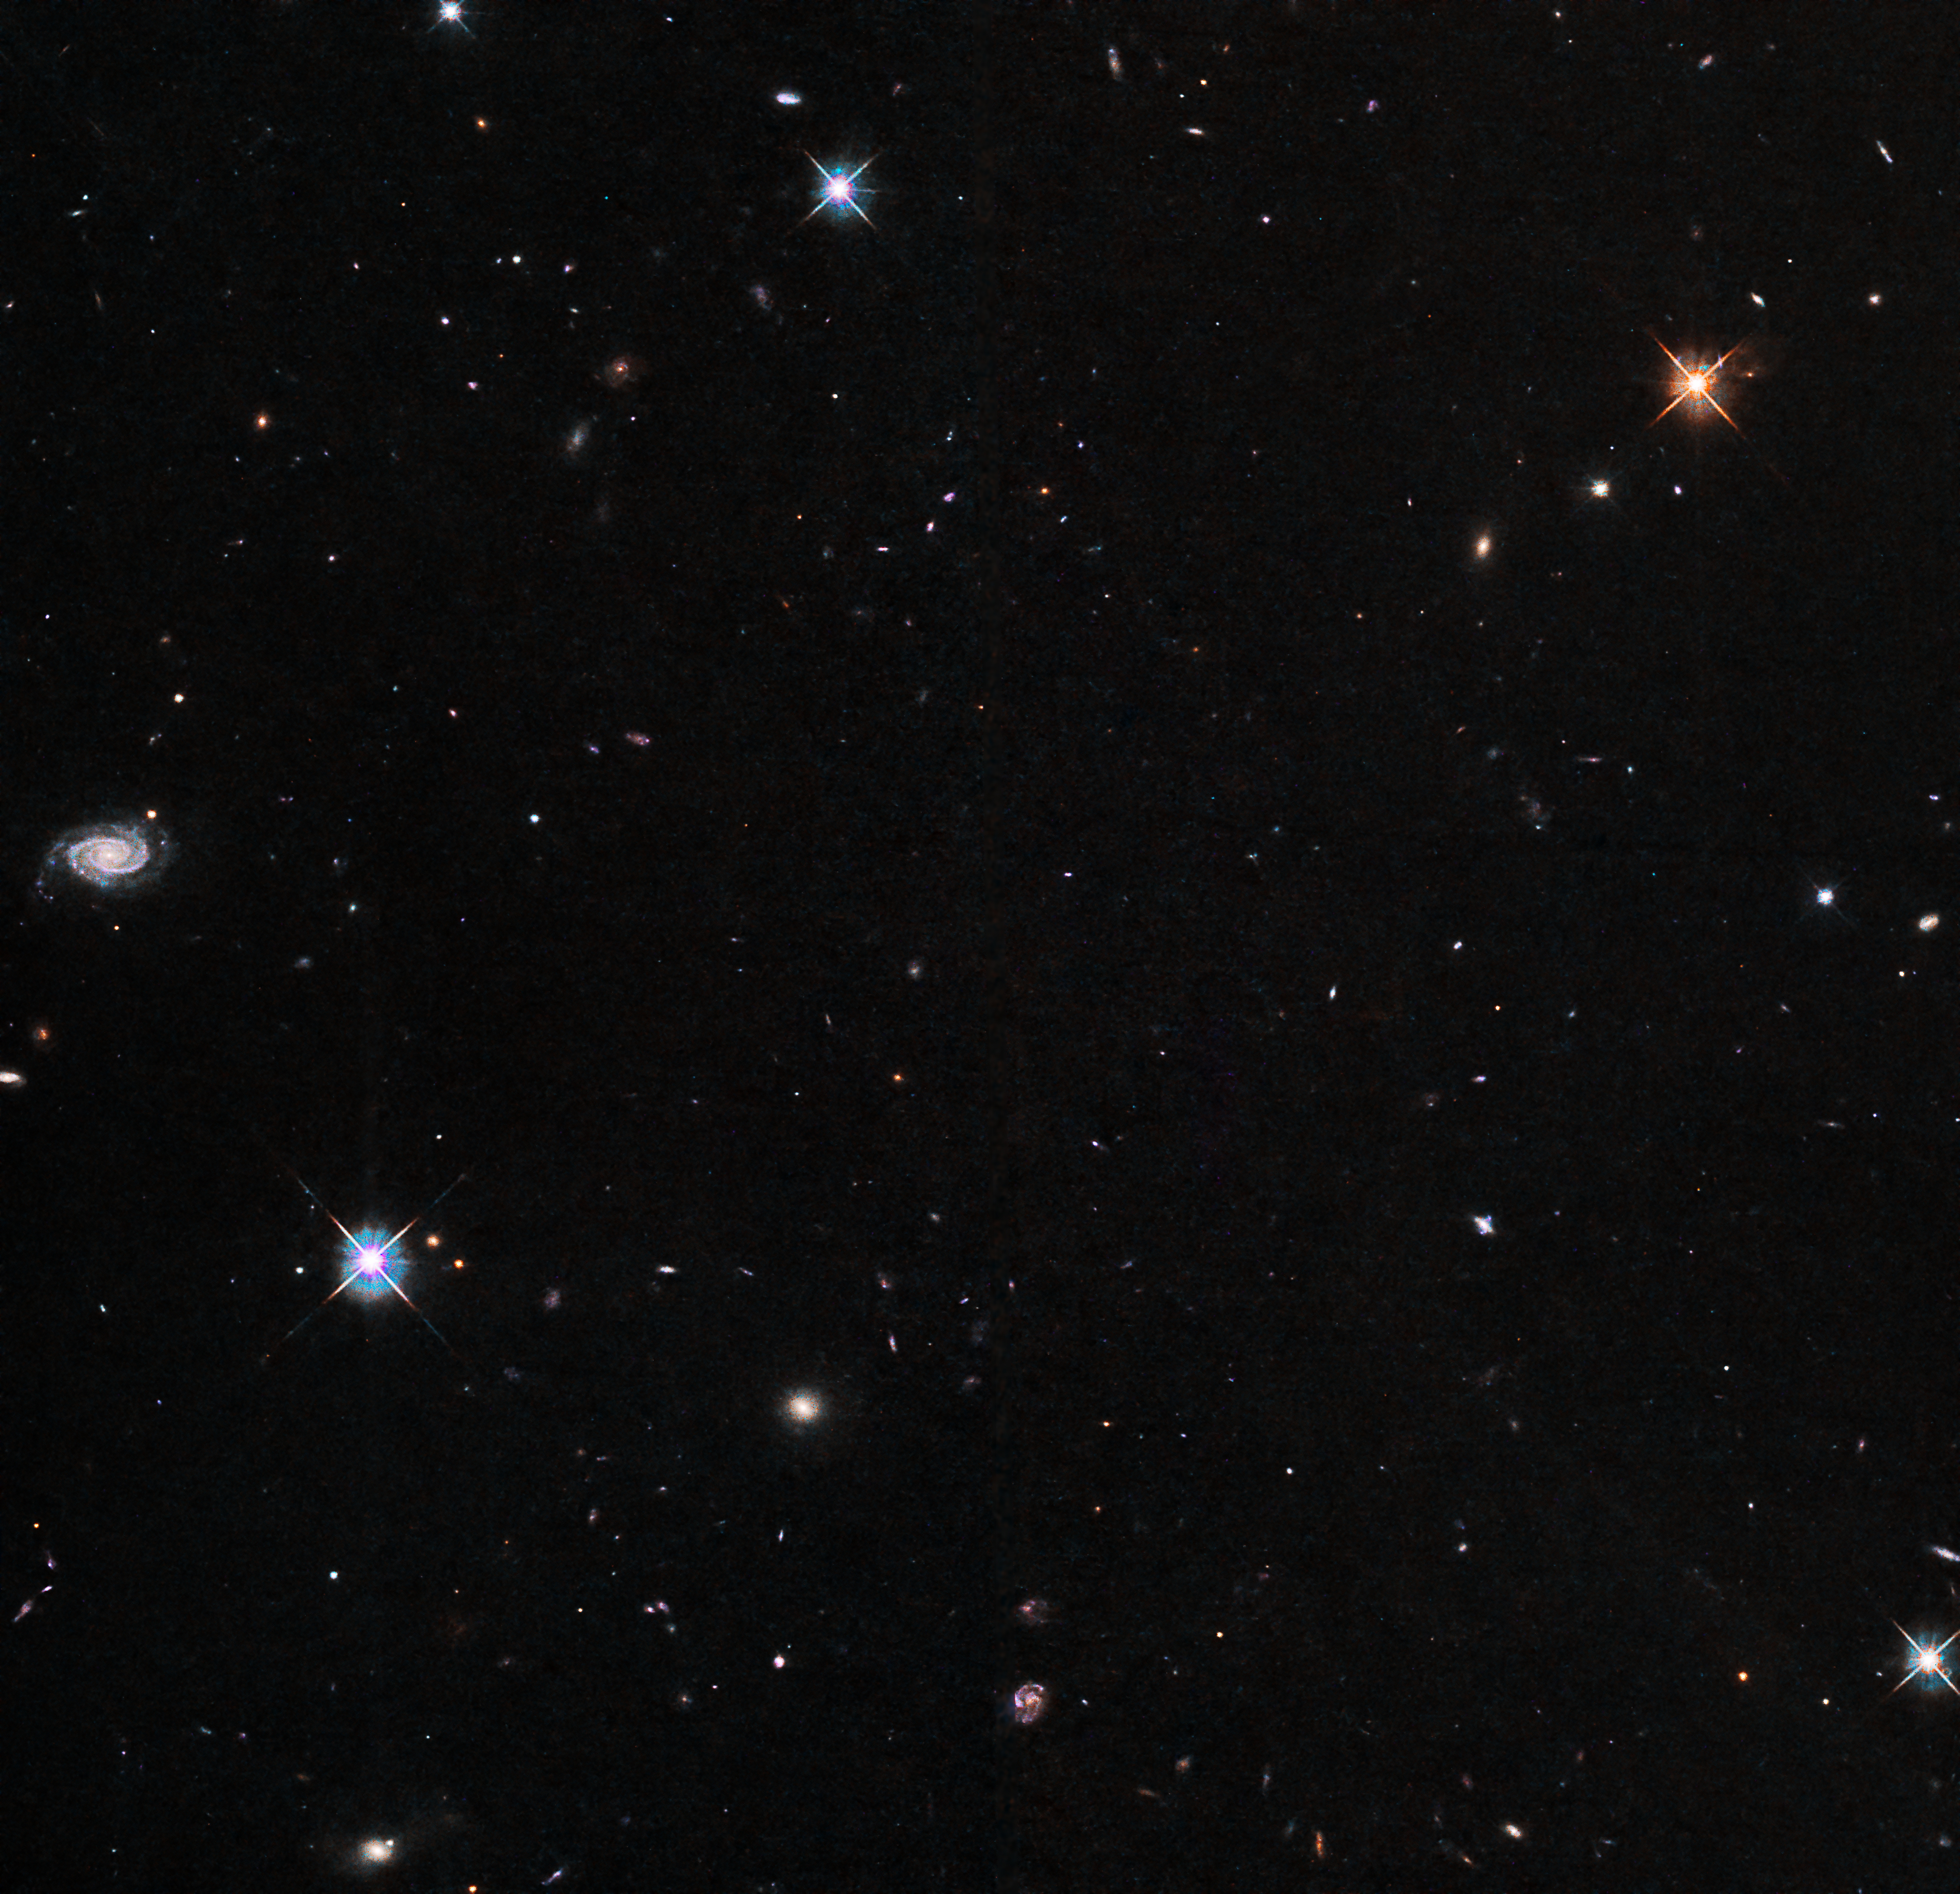 Several bright stars and many background galaxies are visible against a black background.